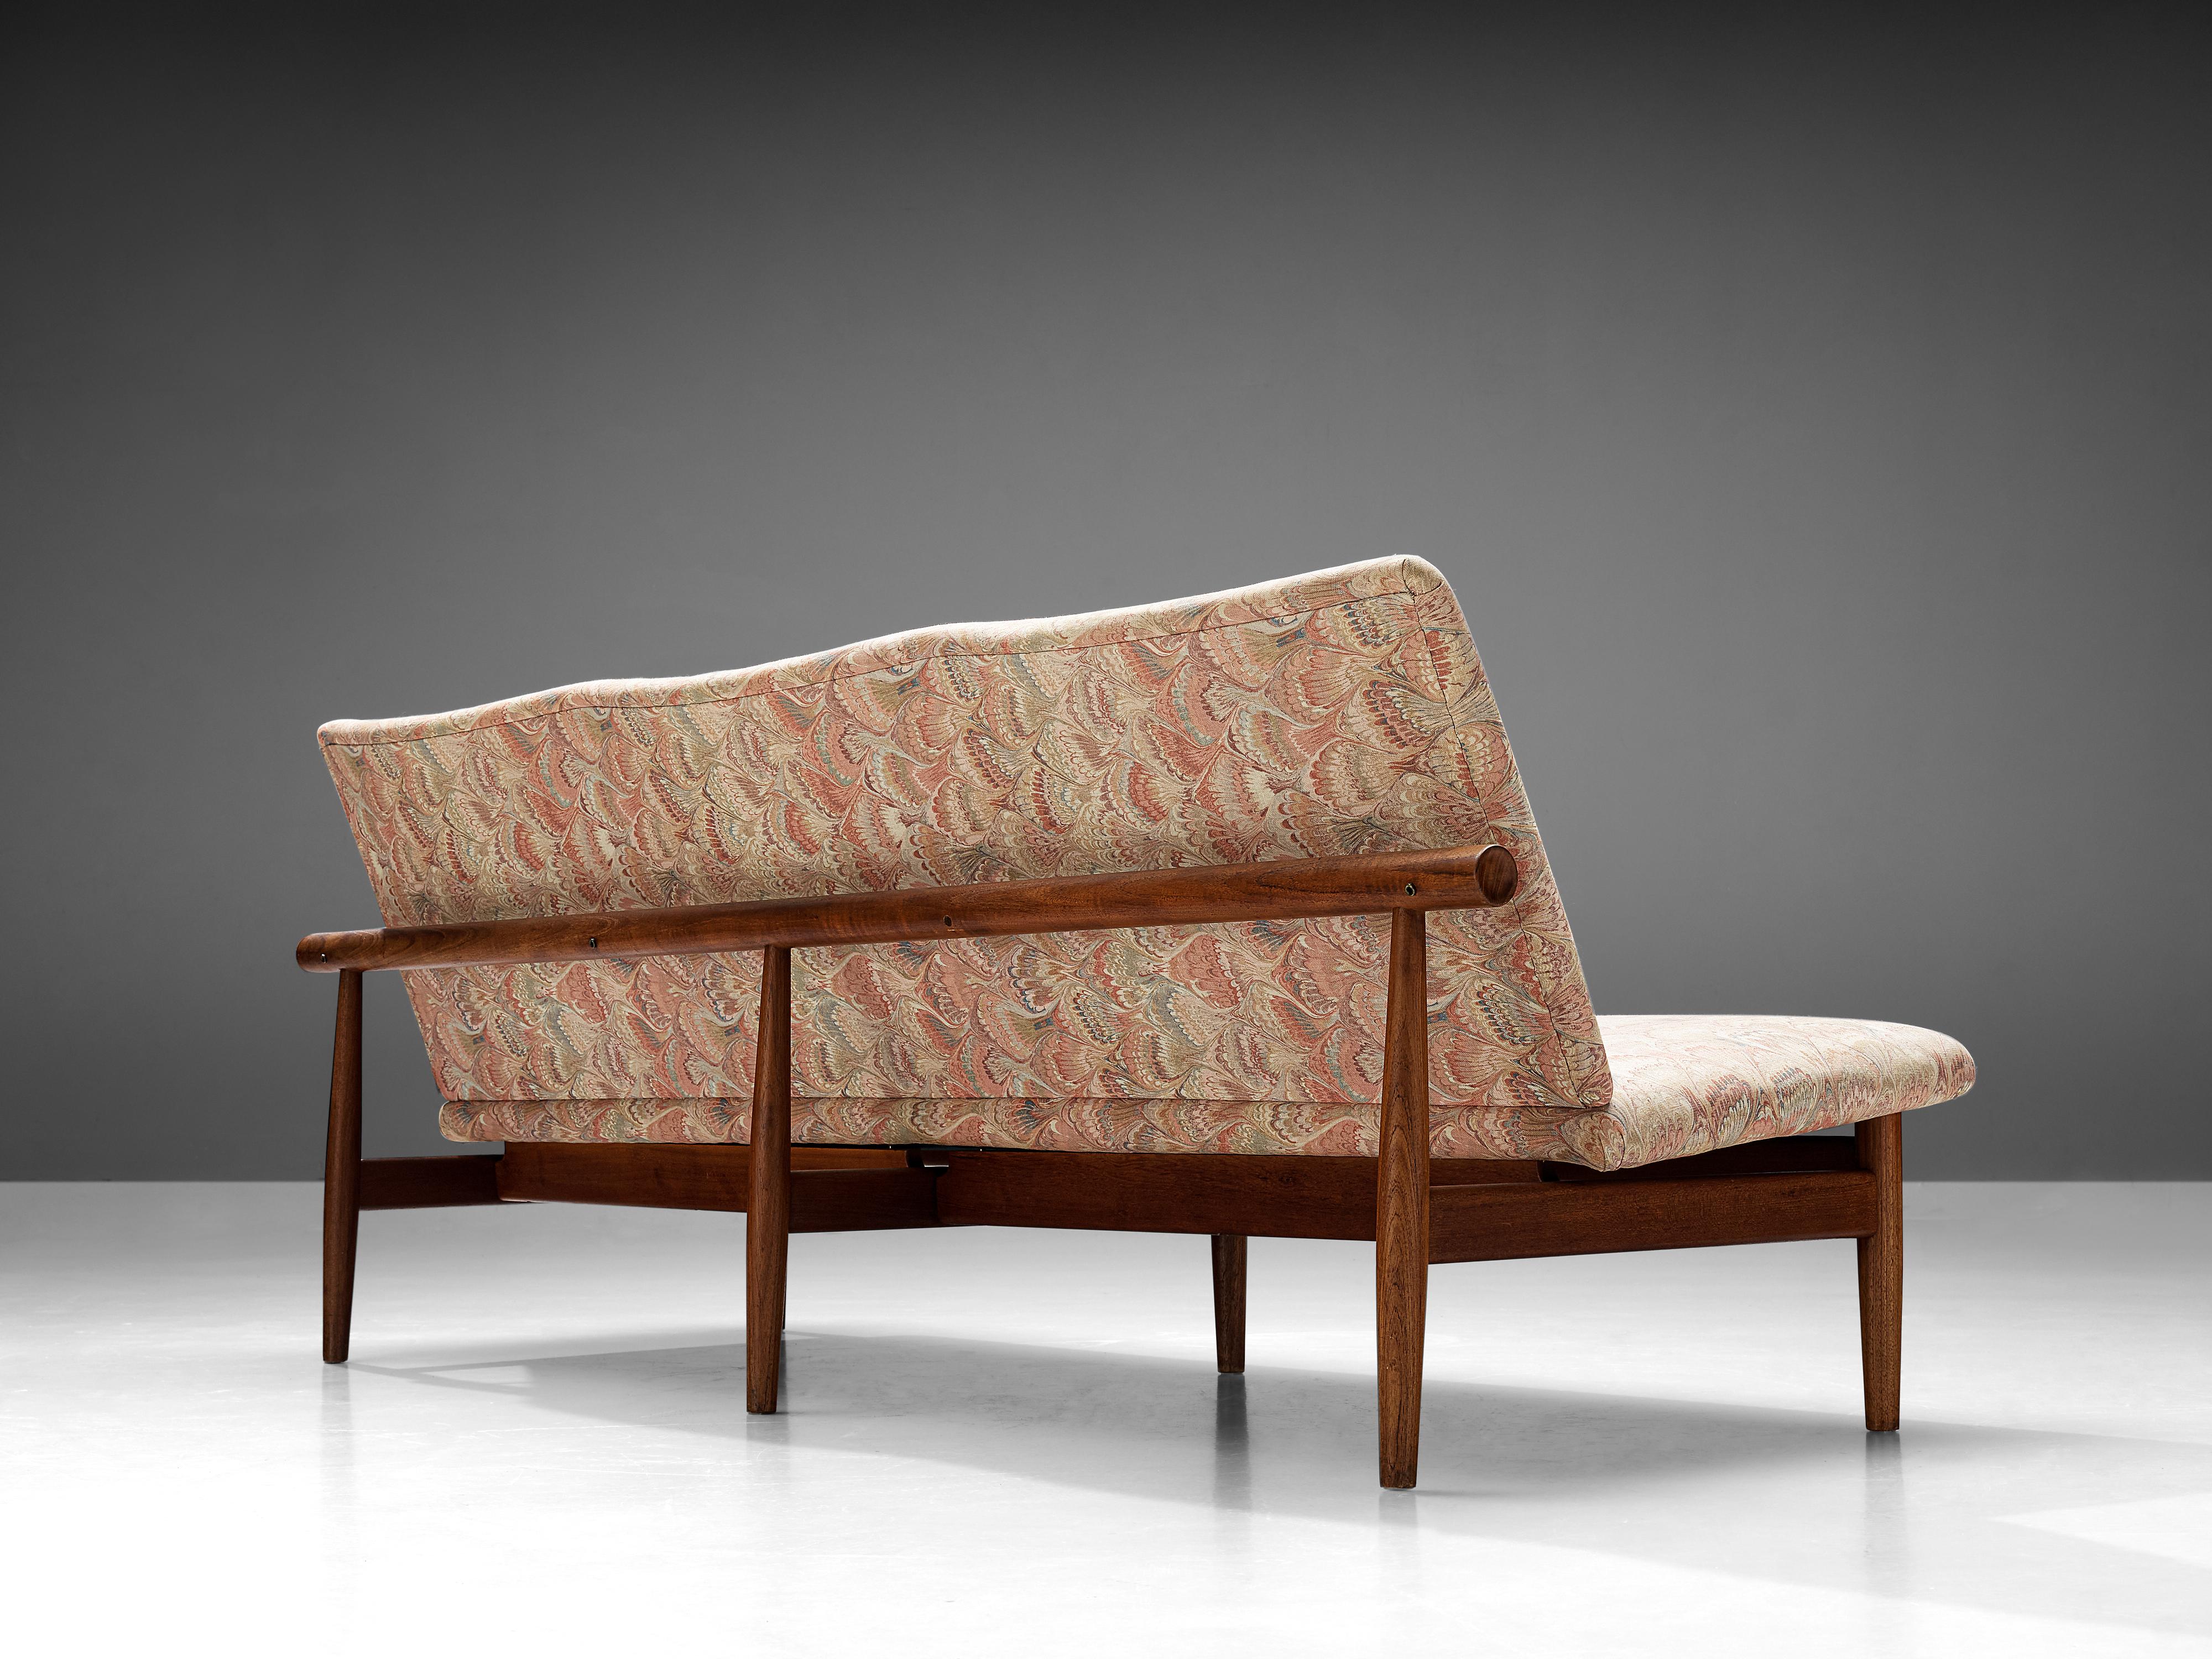 Finn Juhl for France & Søn, sofa model ‘137/3’, teak, brass, upholstery, Denmark, designed in 1957

This sofa from the ‘Japan’ series that Finn Juhl designed for France & Søn exemplifies Juhl’s idea to detach carrying from carried elements. The seat